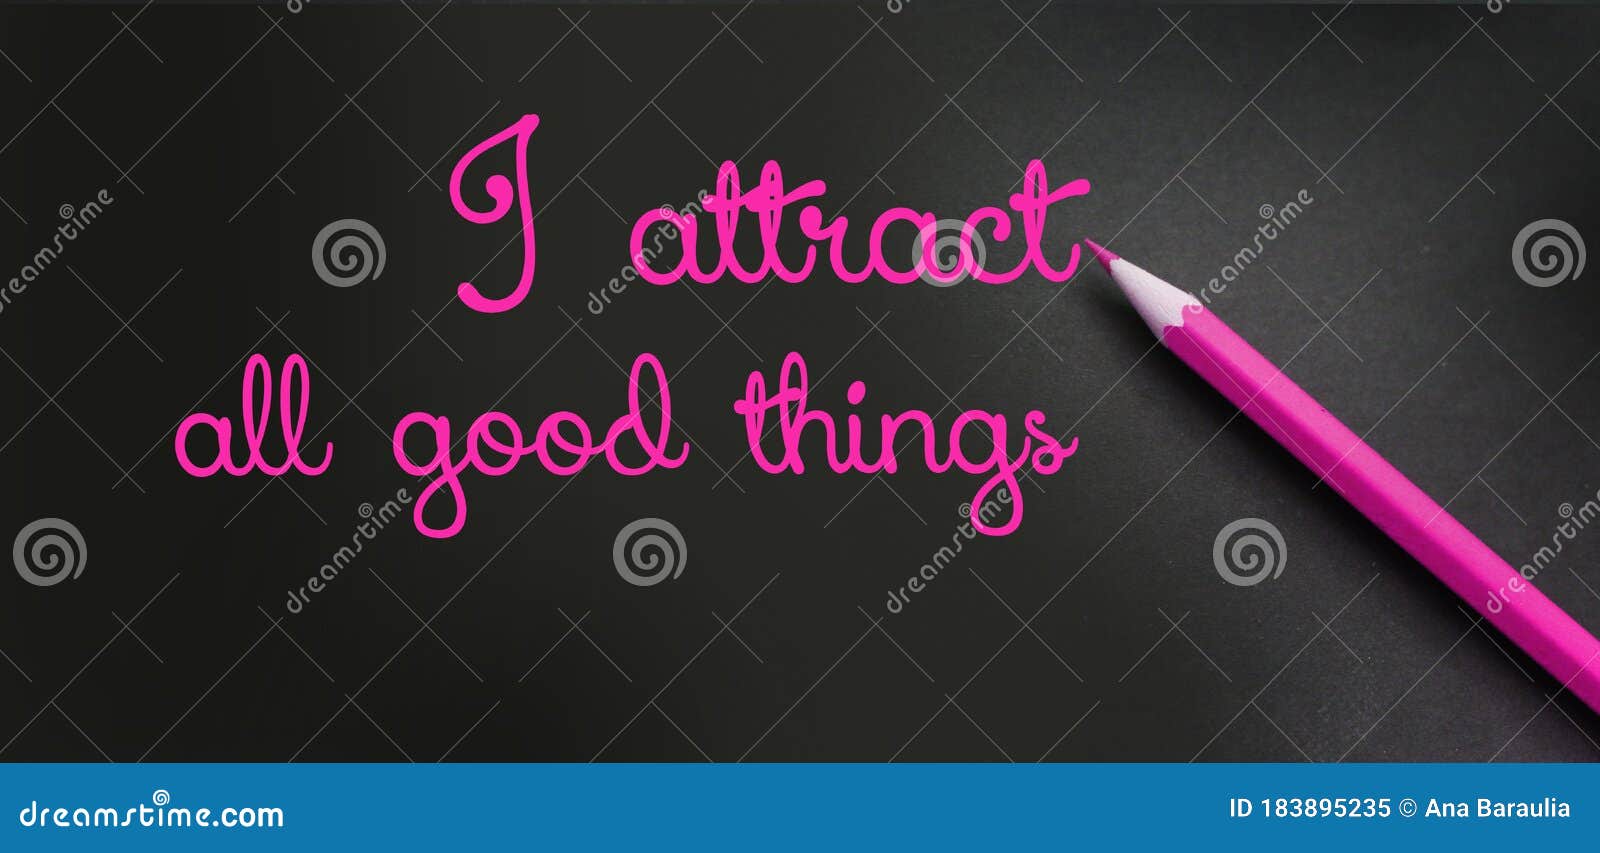 i attract all good things - positive affirmation words - handwriting on a black paper with a pink pencil. law of attraction